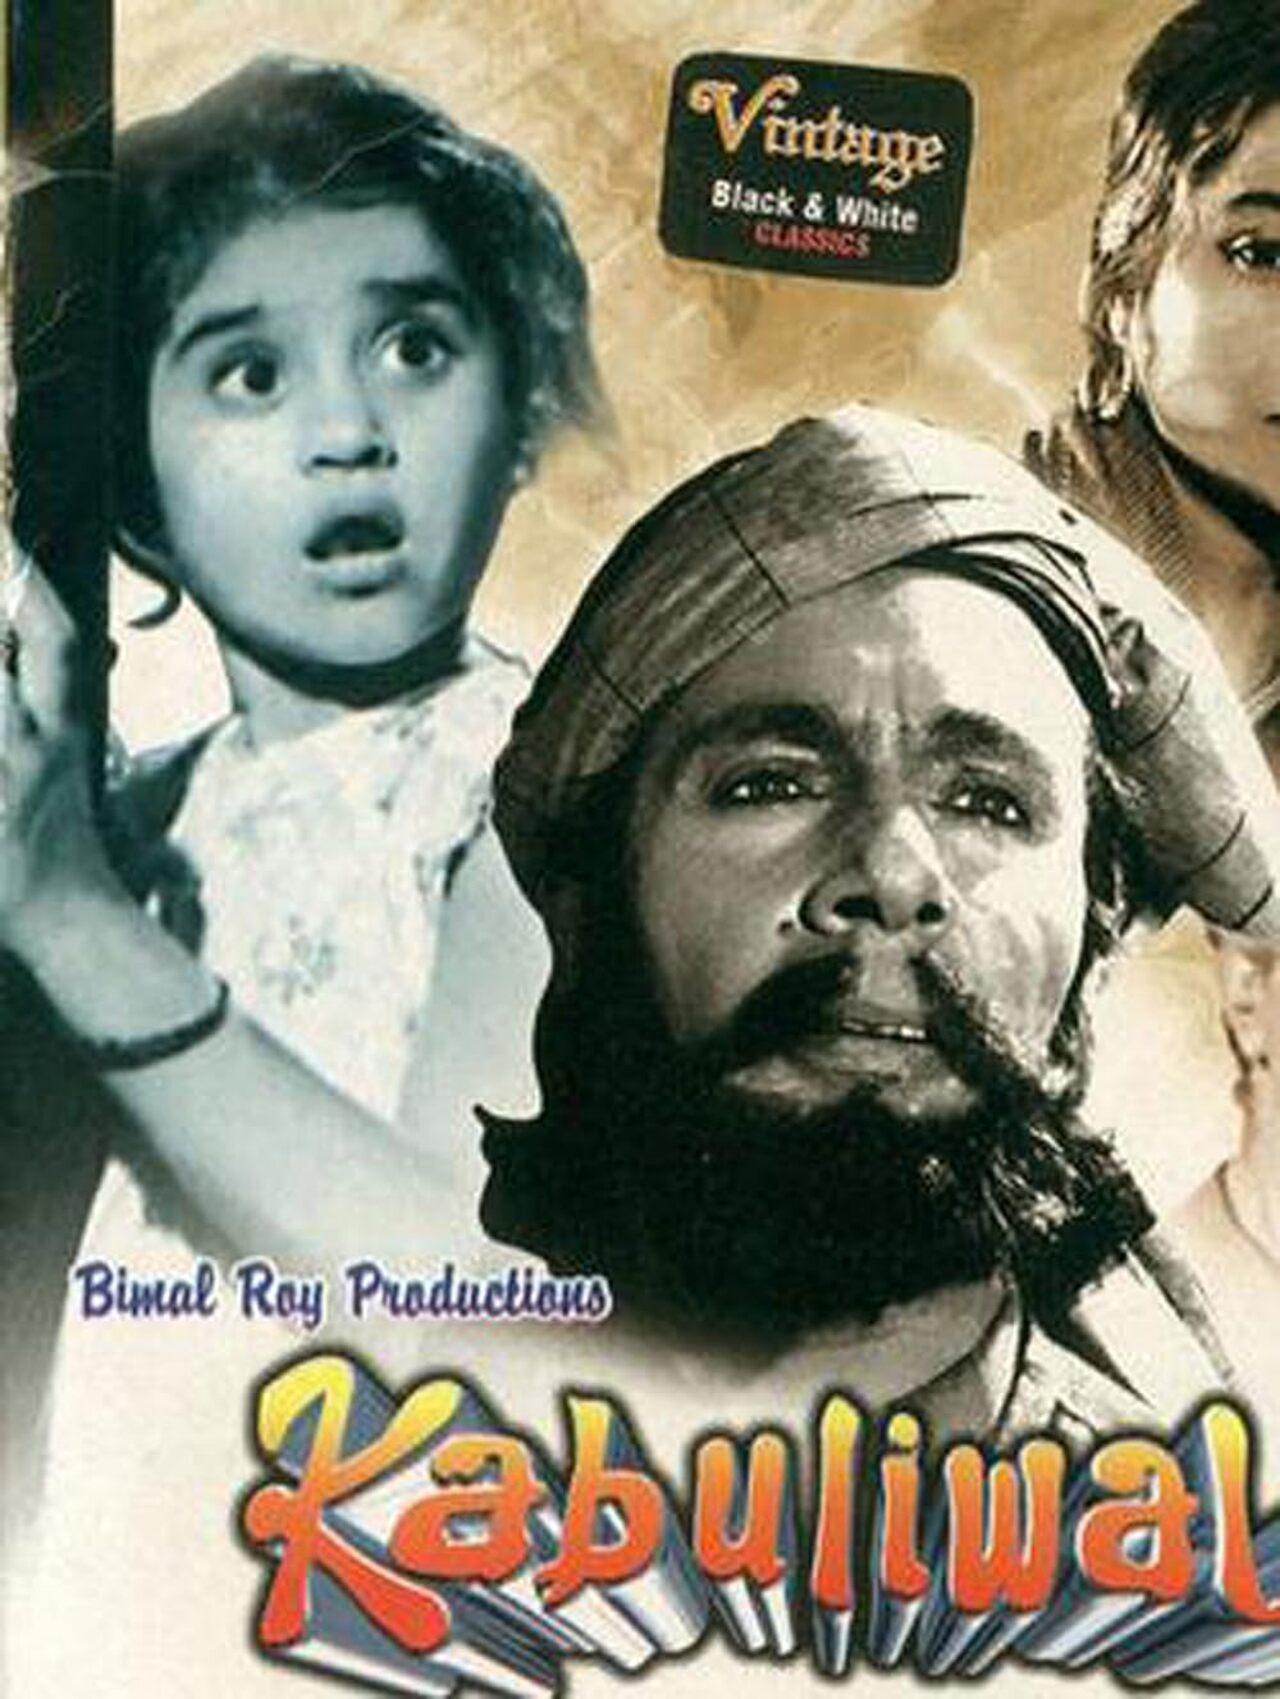 ‘Ae Mere Pyare Watan’ is a soulful Hindi song from the 1961 Bollywood film ‘Kabuliwala’. The film was directed by Hemen Gupta and is based on the famous short story ‘Kabuliwala’ written by Rabindranath Tagore